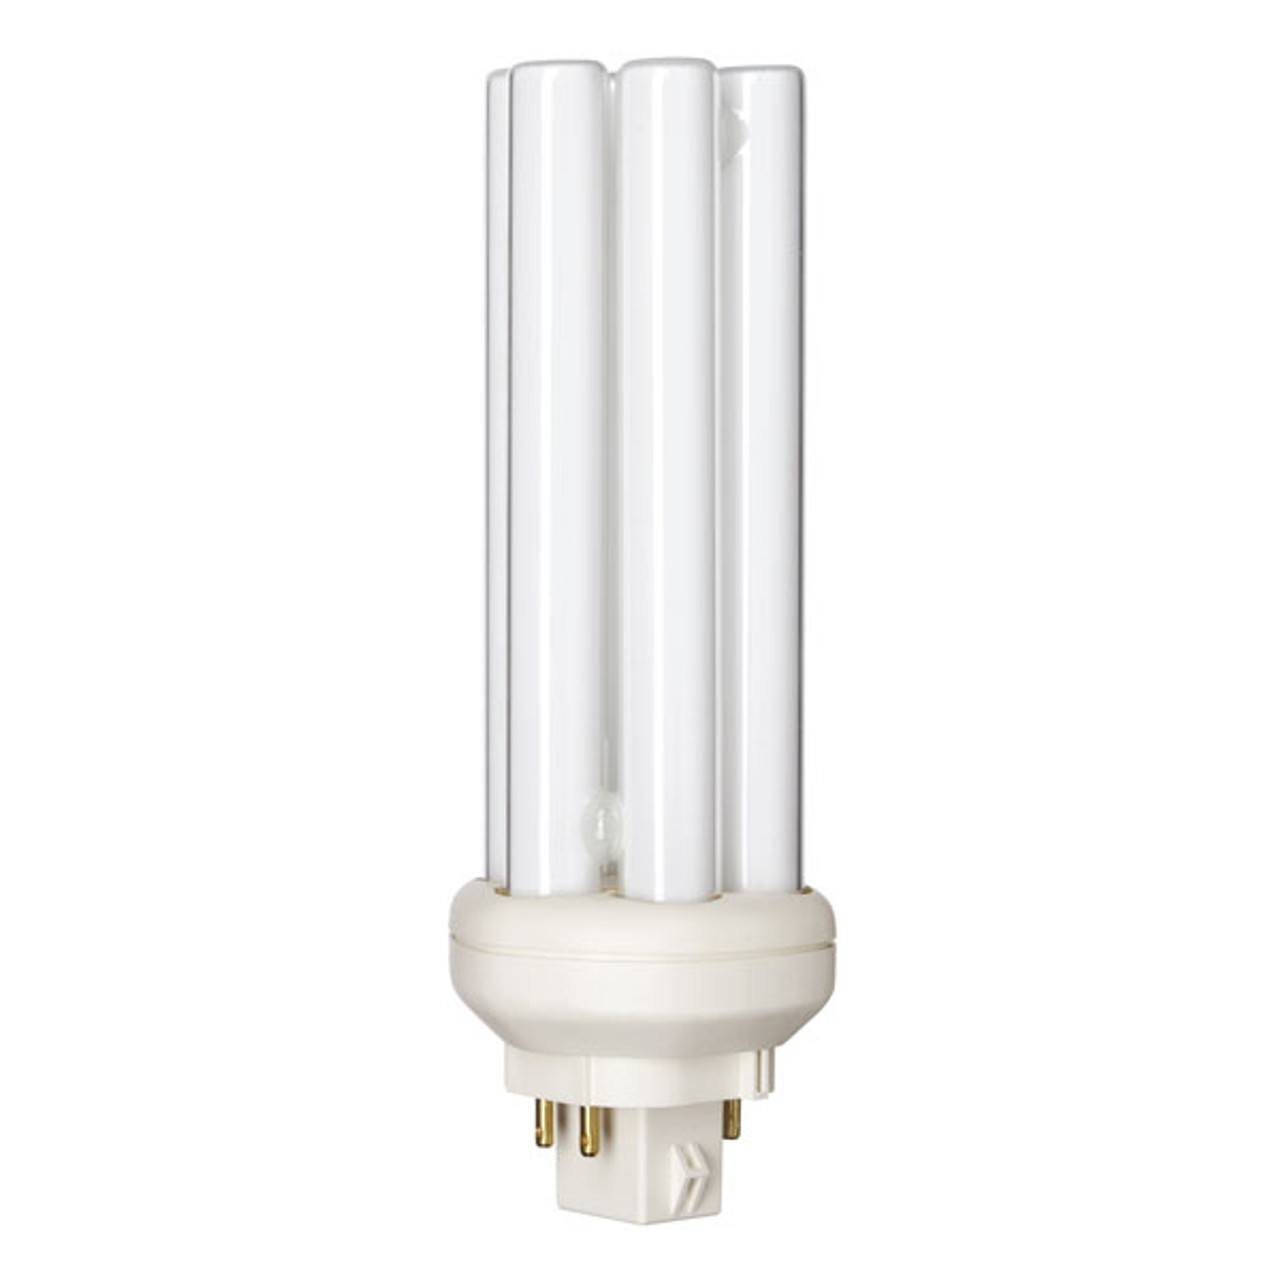 Philips PL-T 32W 4-Pin 827 Very Warm White